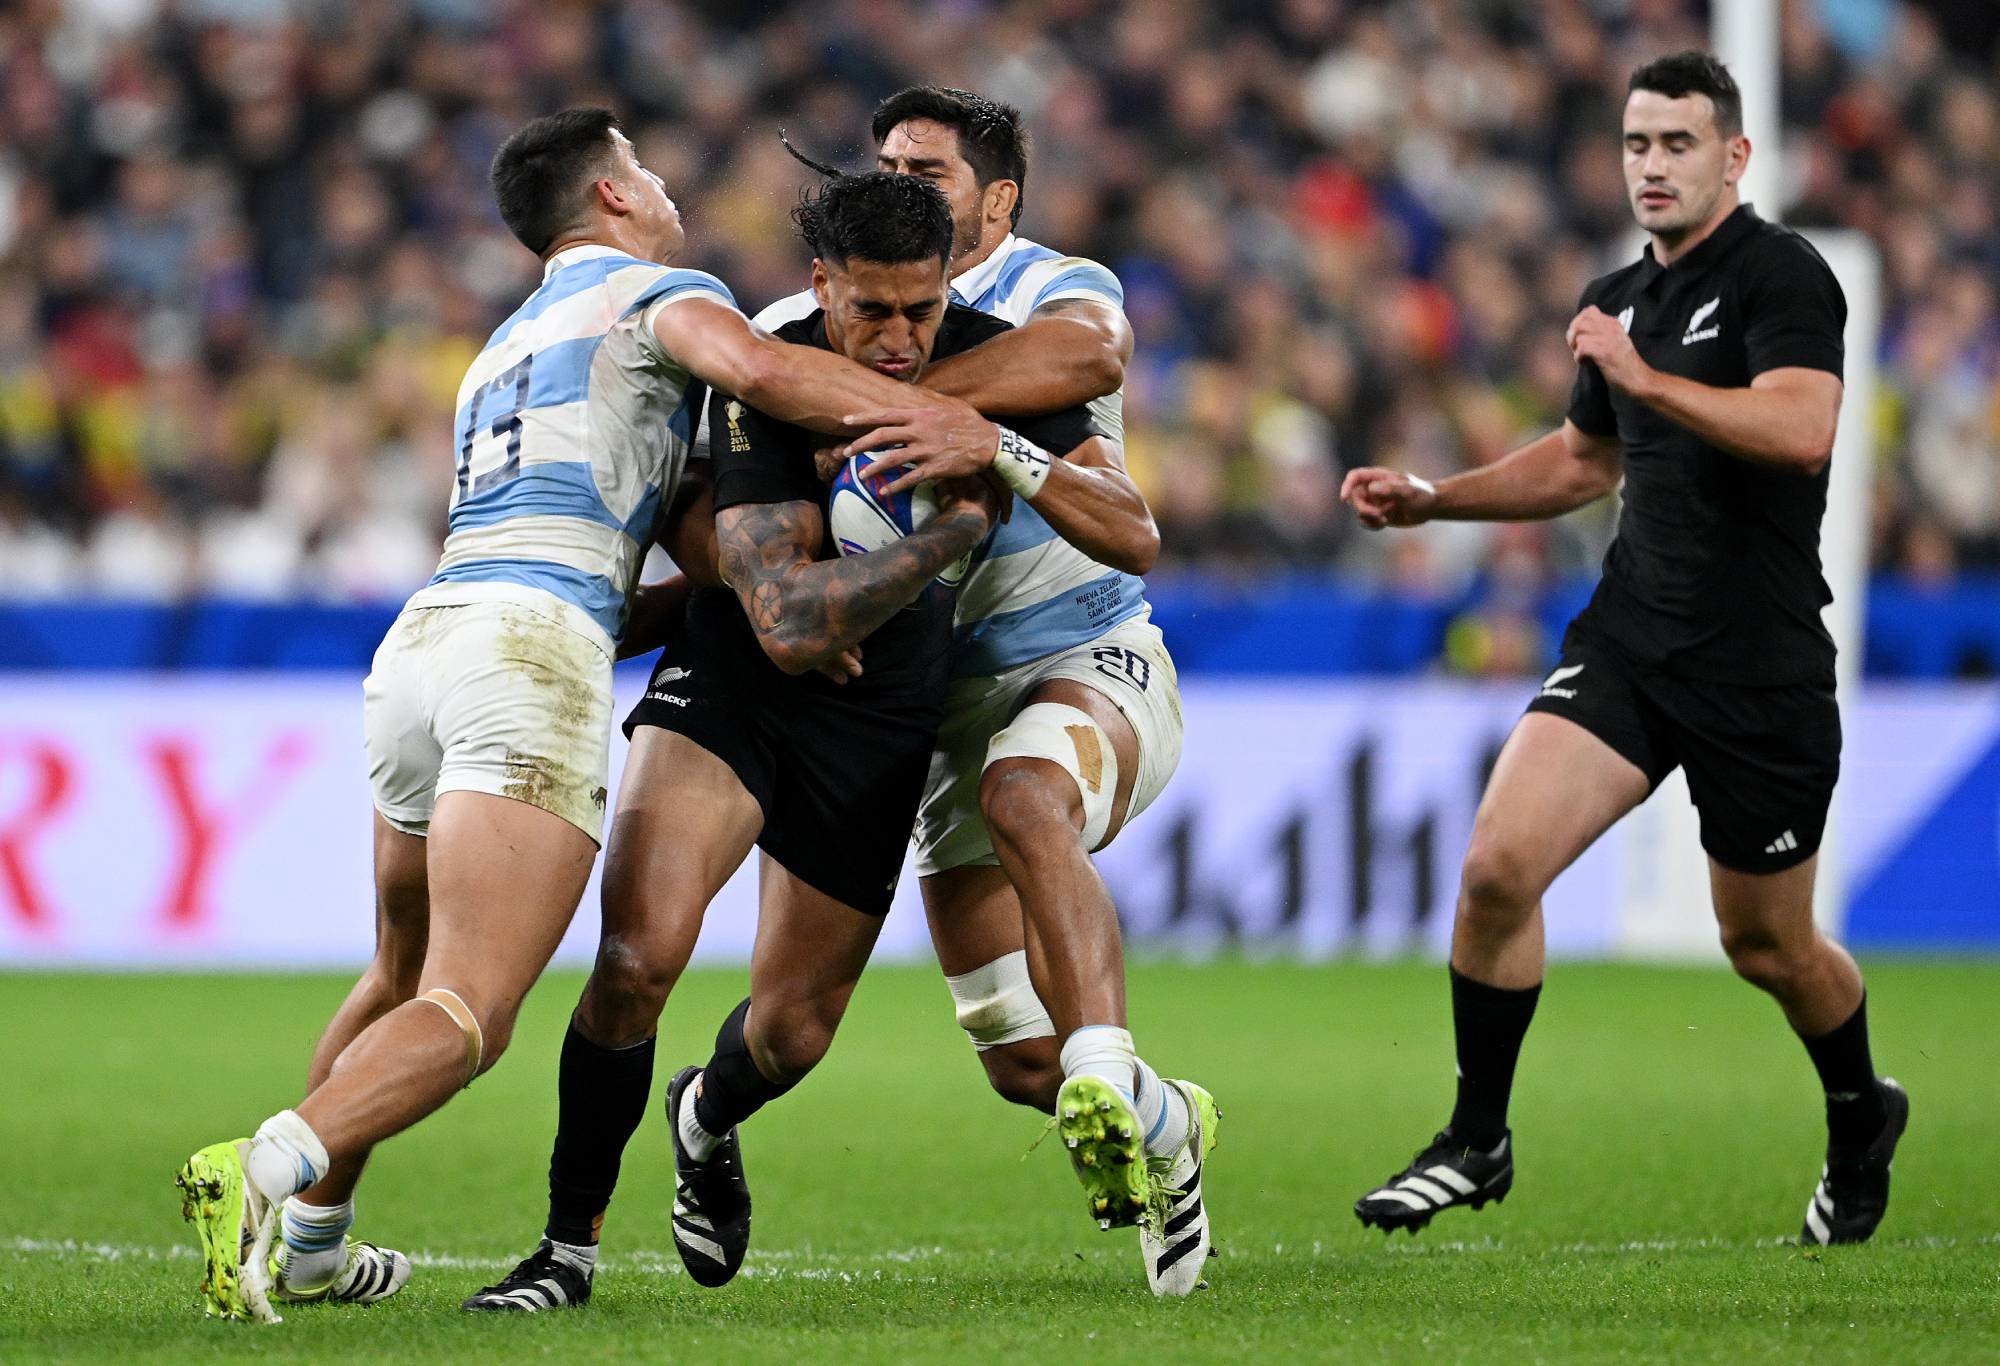 Rieko Ioane of New Zealand is tackled by Lucio Cinti and Rodrigo Bruni of Argentina during the Rugby World Cup France 2023 semi-final match between Argentina and New Zealand at Stade de France on October 20, 2023 in Paris, France. (Photo by Hannah Peters/Getty Images)